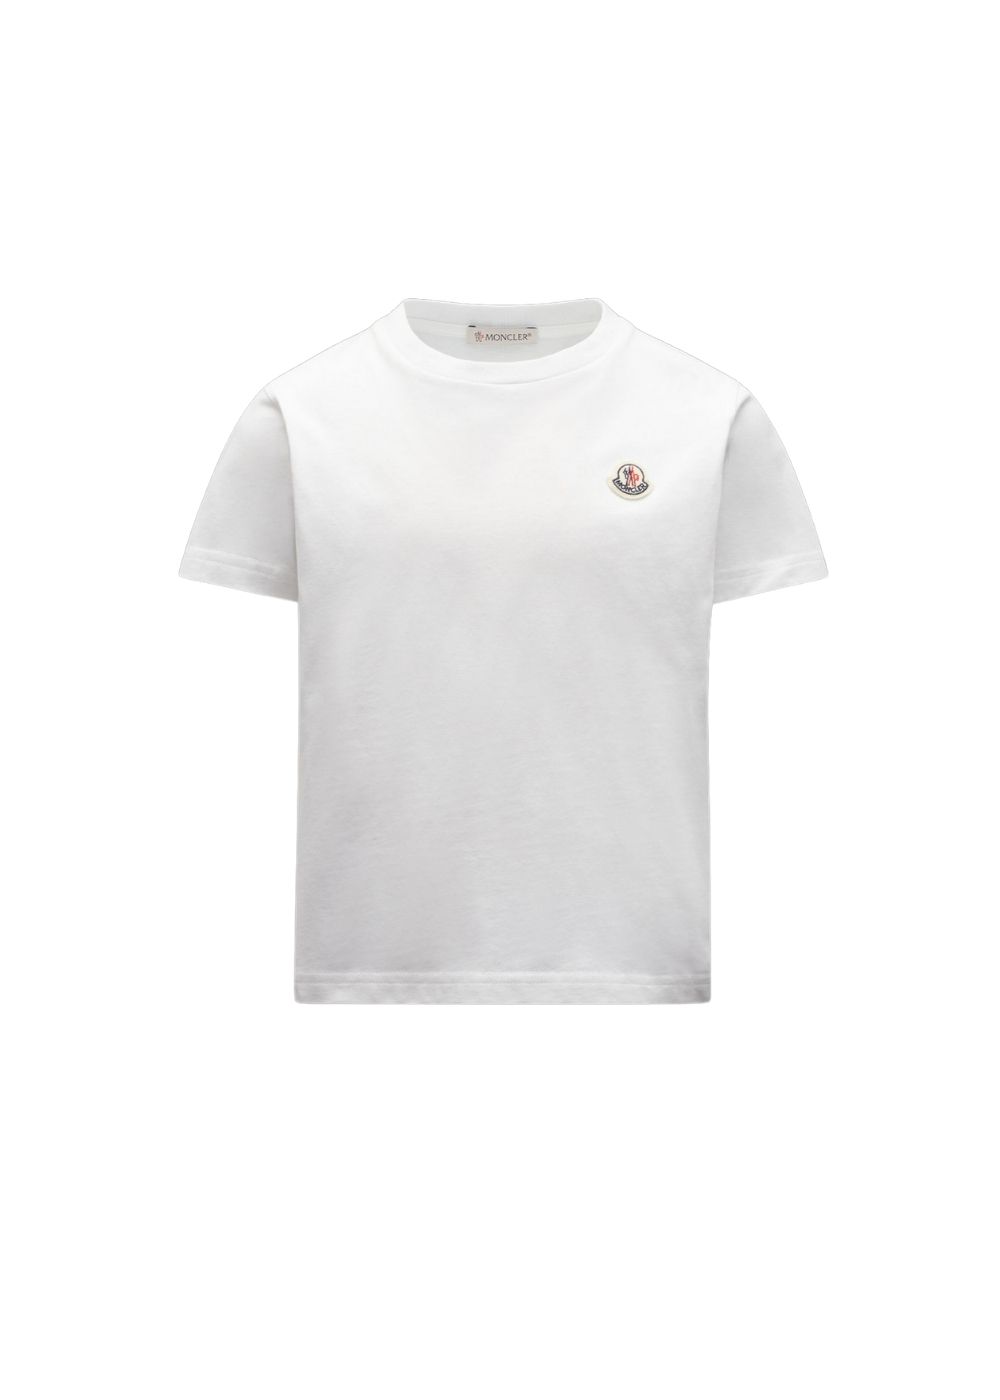 Featured image for “Moncler T-shirt Con Logo”